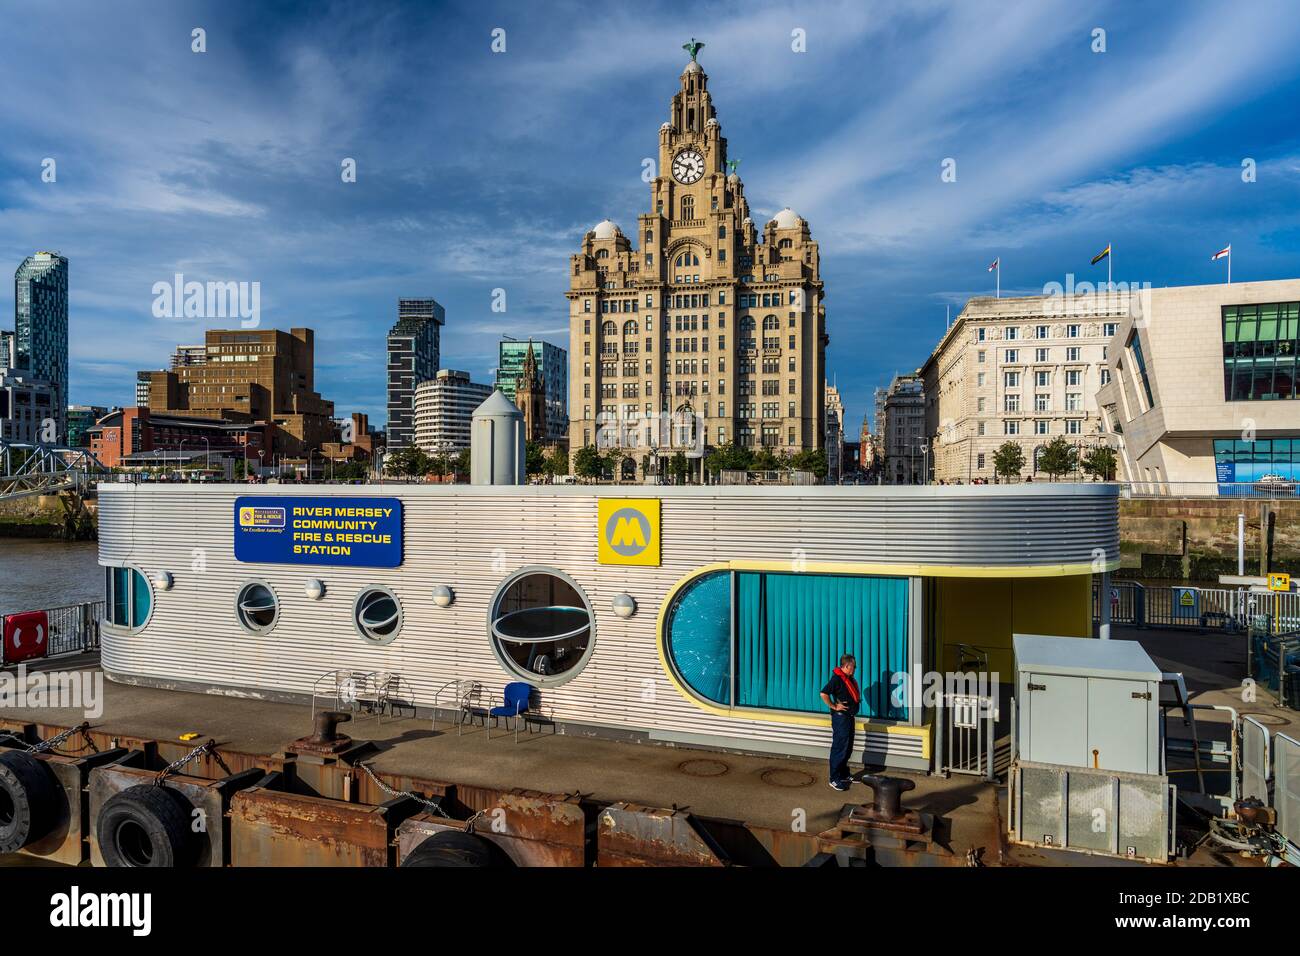 River Mersey Community Fire and Rescue Station Pier Head Liverpool - Liverpool Fire and Rescue Service River Station. Liverpool Marine Rescue Unit. Stockfoto